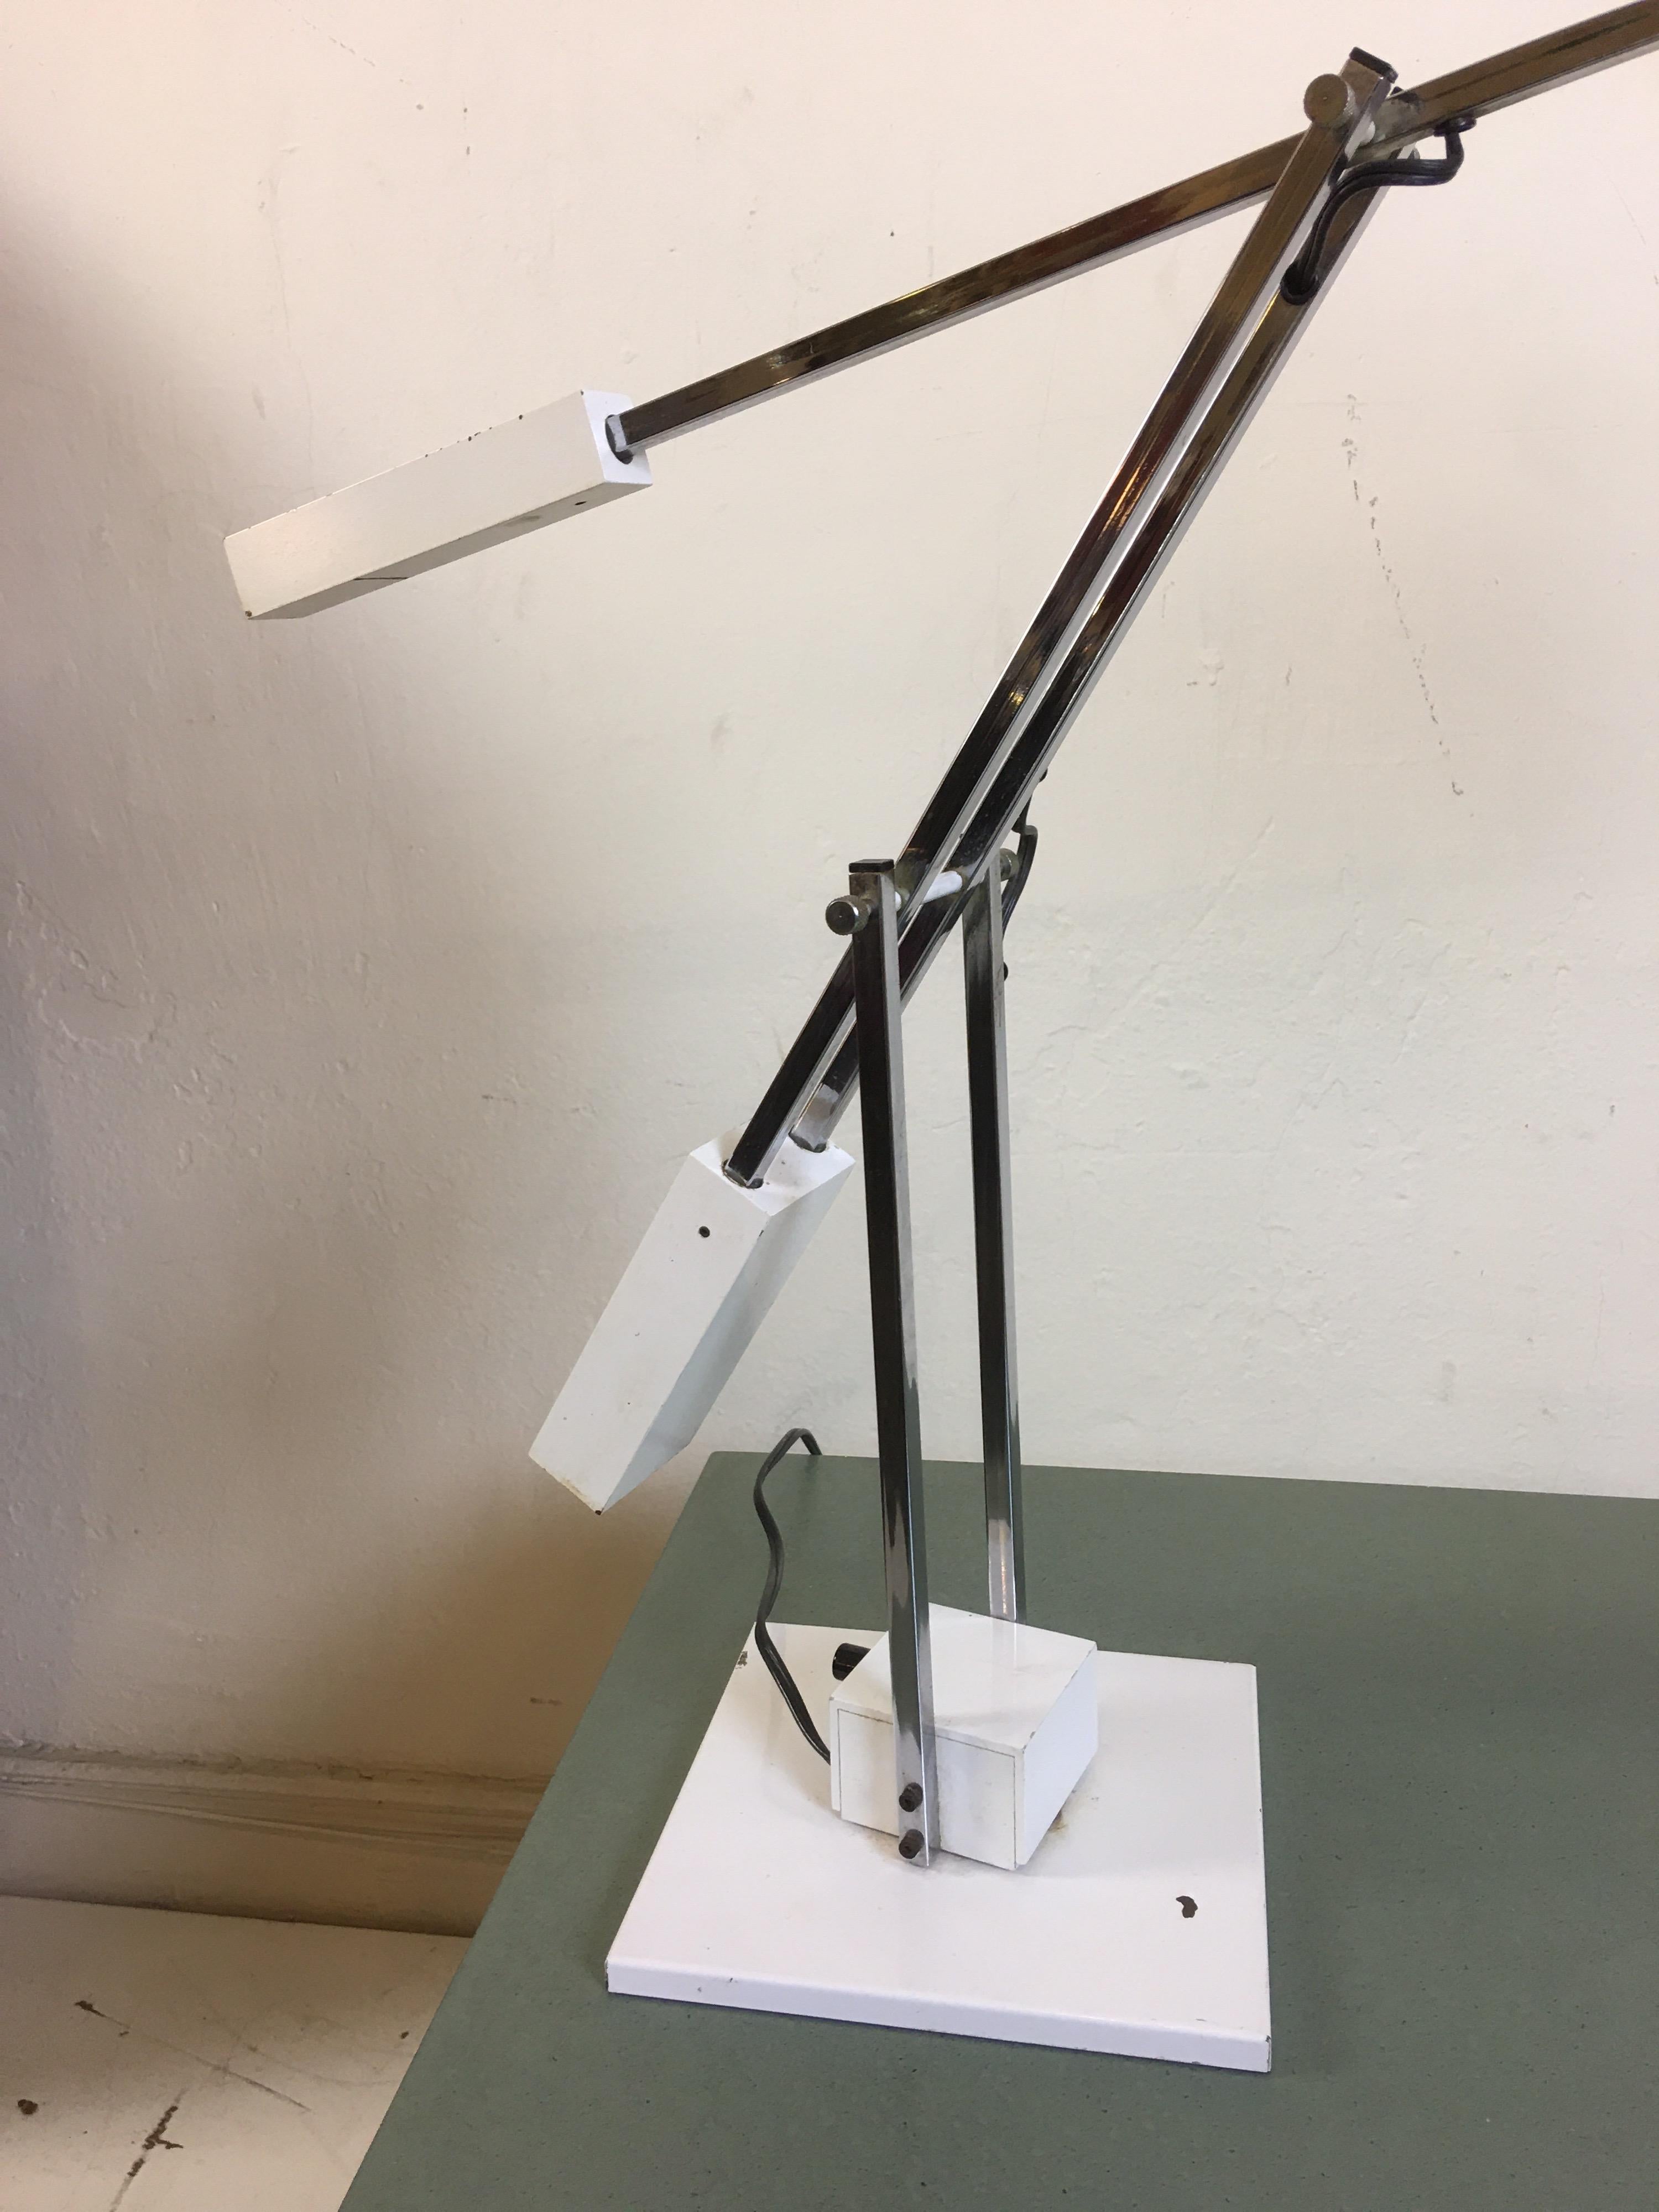 Robert Sonneman Counter-Weighted Swiveling desk lamp from the 1970s. Metal and chrome, adjusts into many positions. Dimmer switch on bottom cube. Shows some paint loss. Early example.